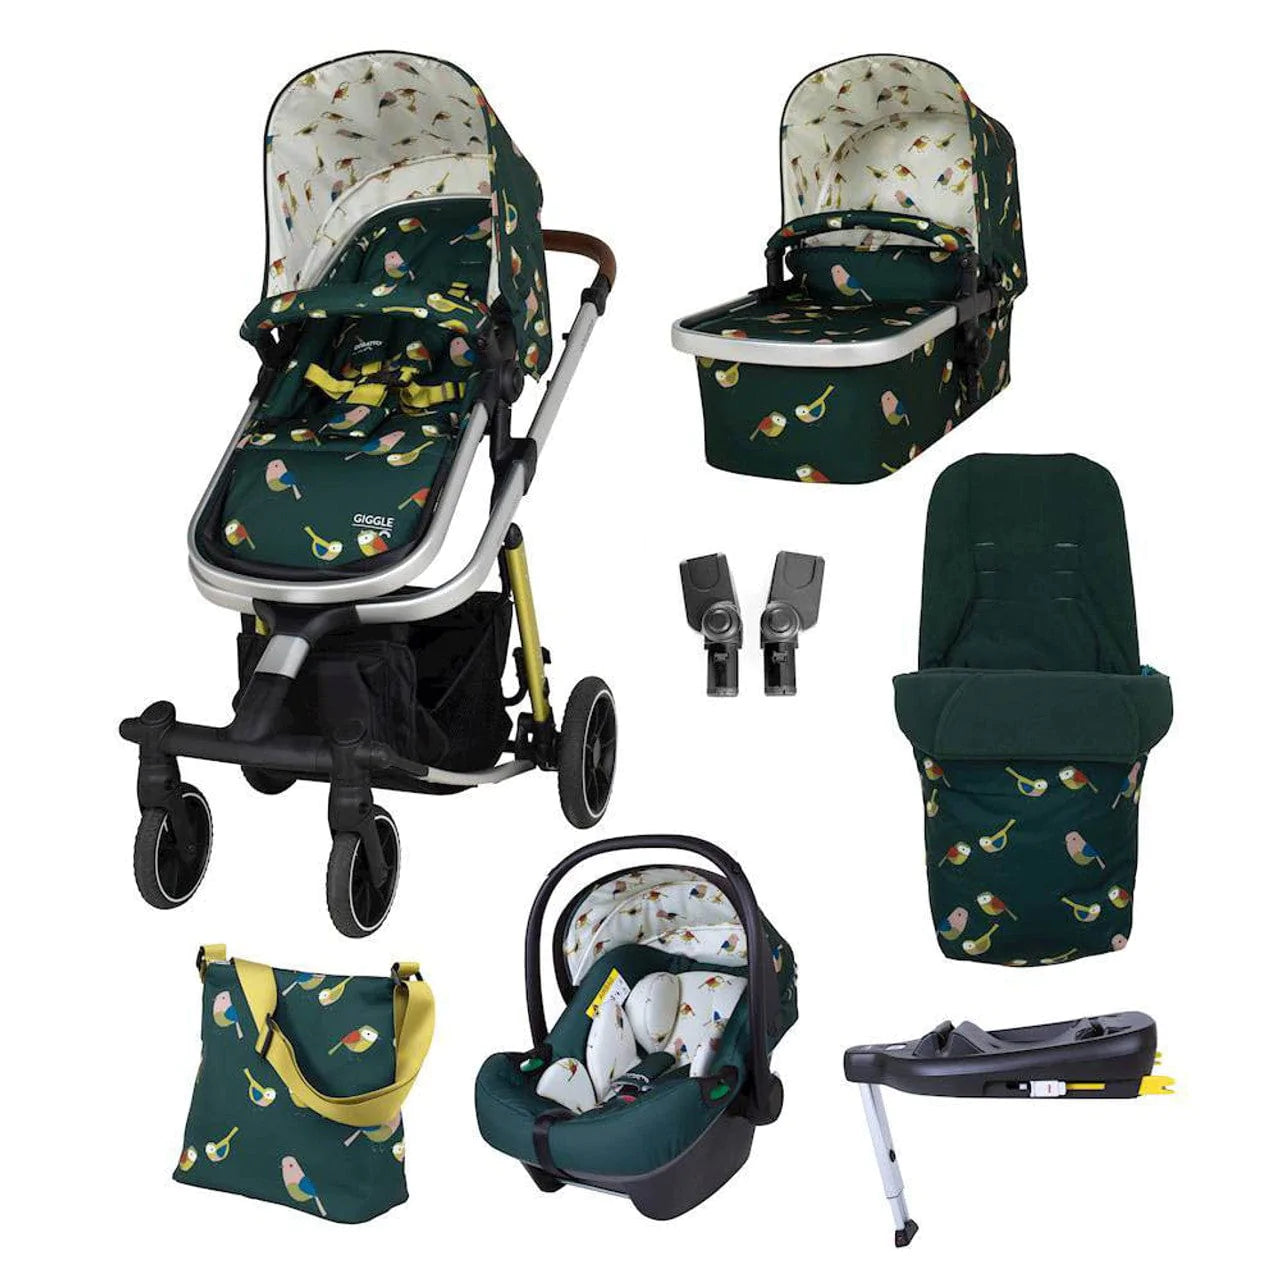 Cosatto Prams & Car Seat Bundles Birdland Cosatto Giggle Trail i-Size Everything Bundle - Direct Delivery